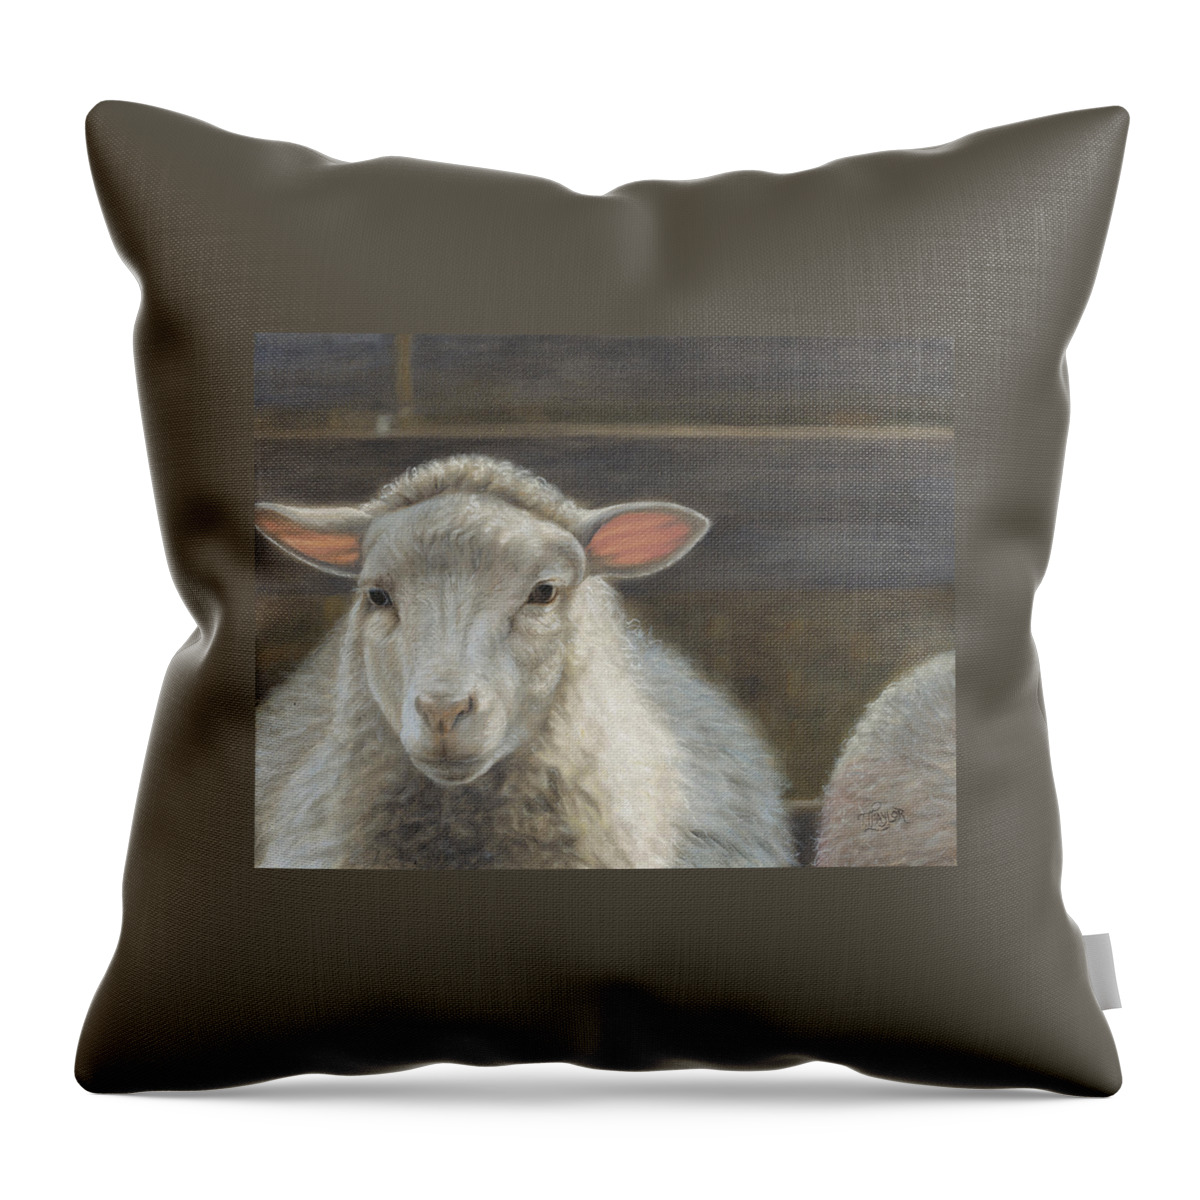 Sheep Throw Pillow featuring the painting Waiting For The Shepherd by Tammy Taylor